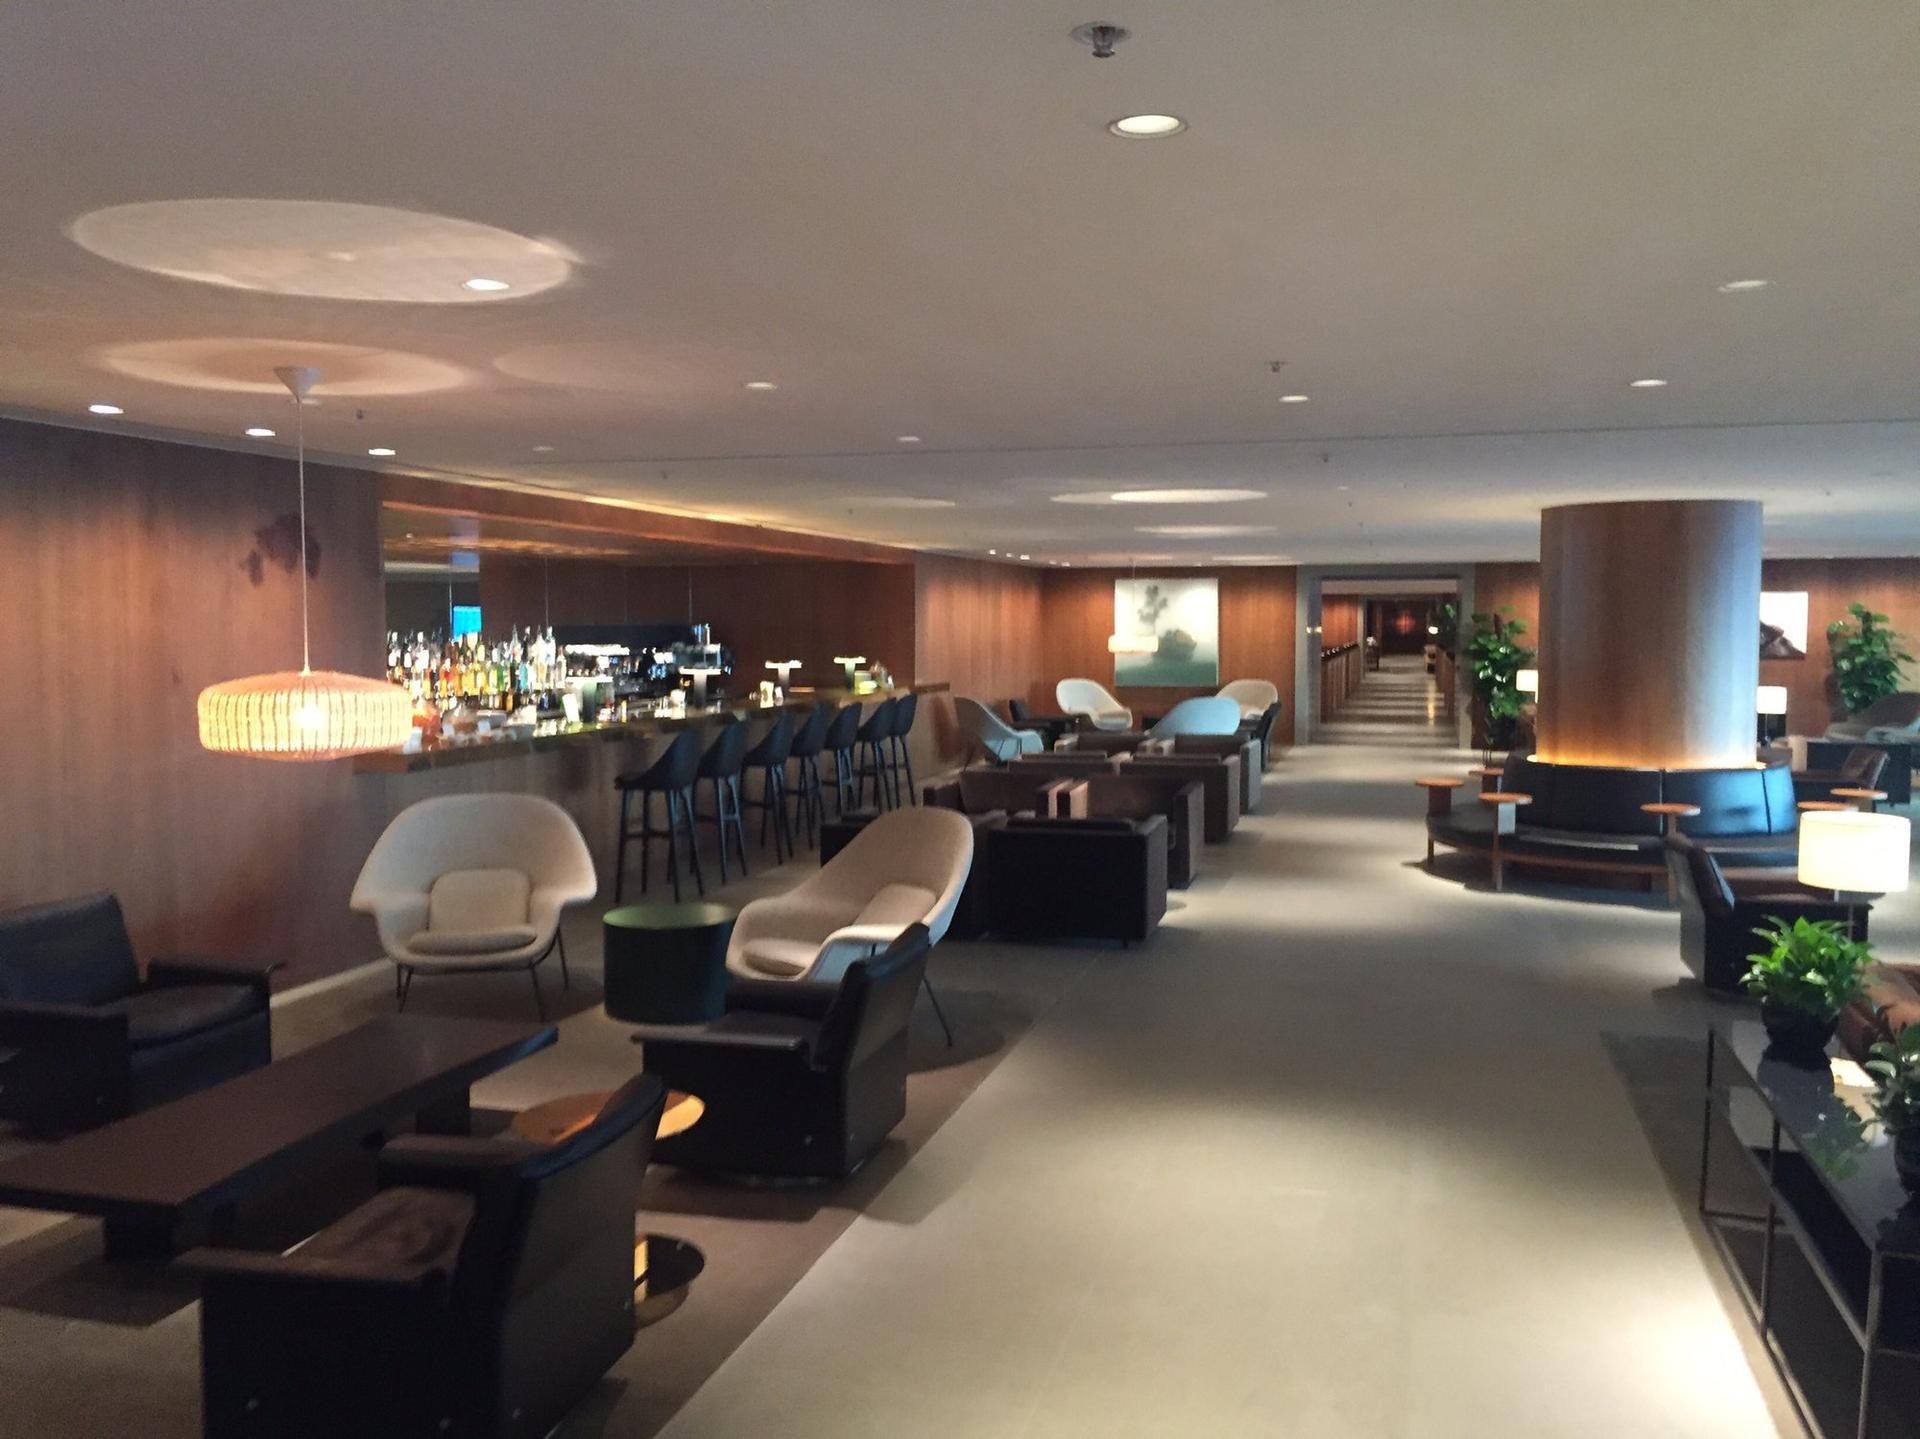 Cathay Pacific The Pier Business Class Lounge image 22 of 61